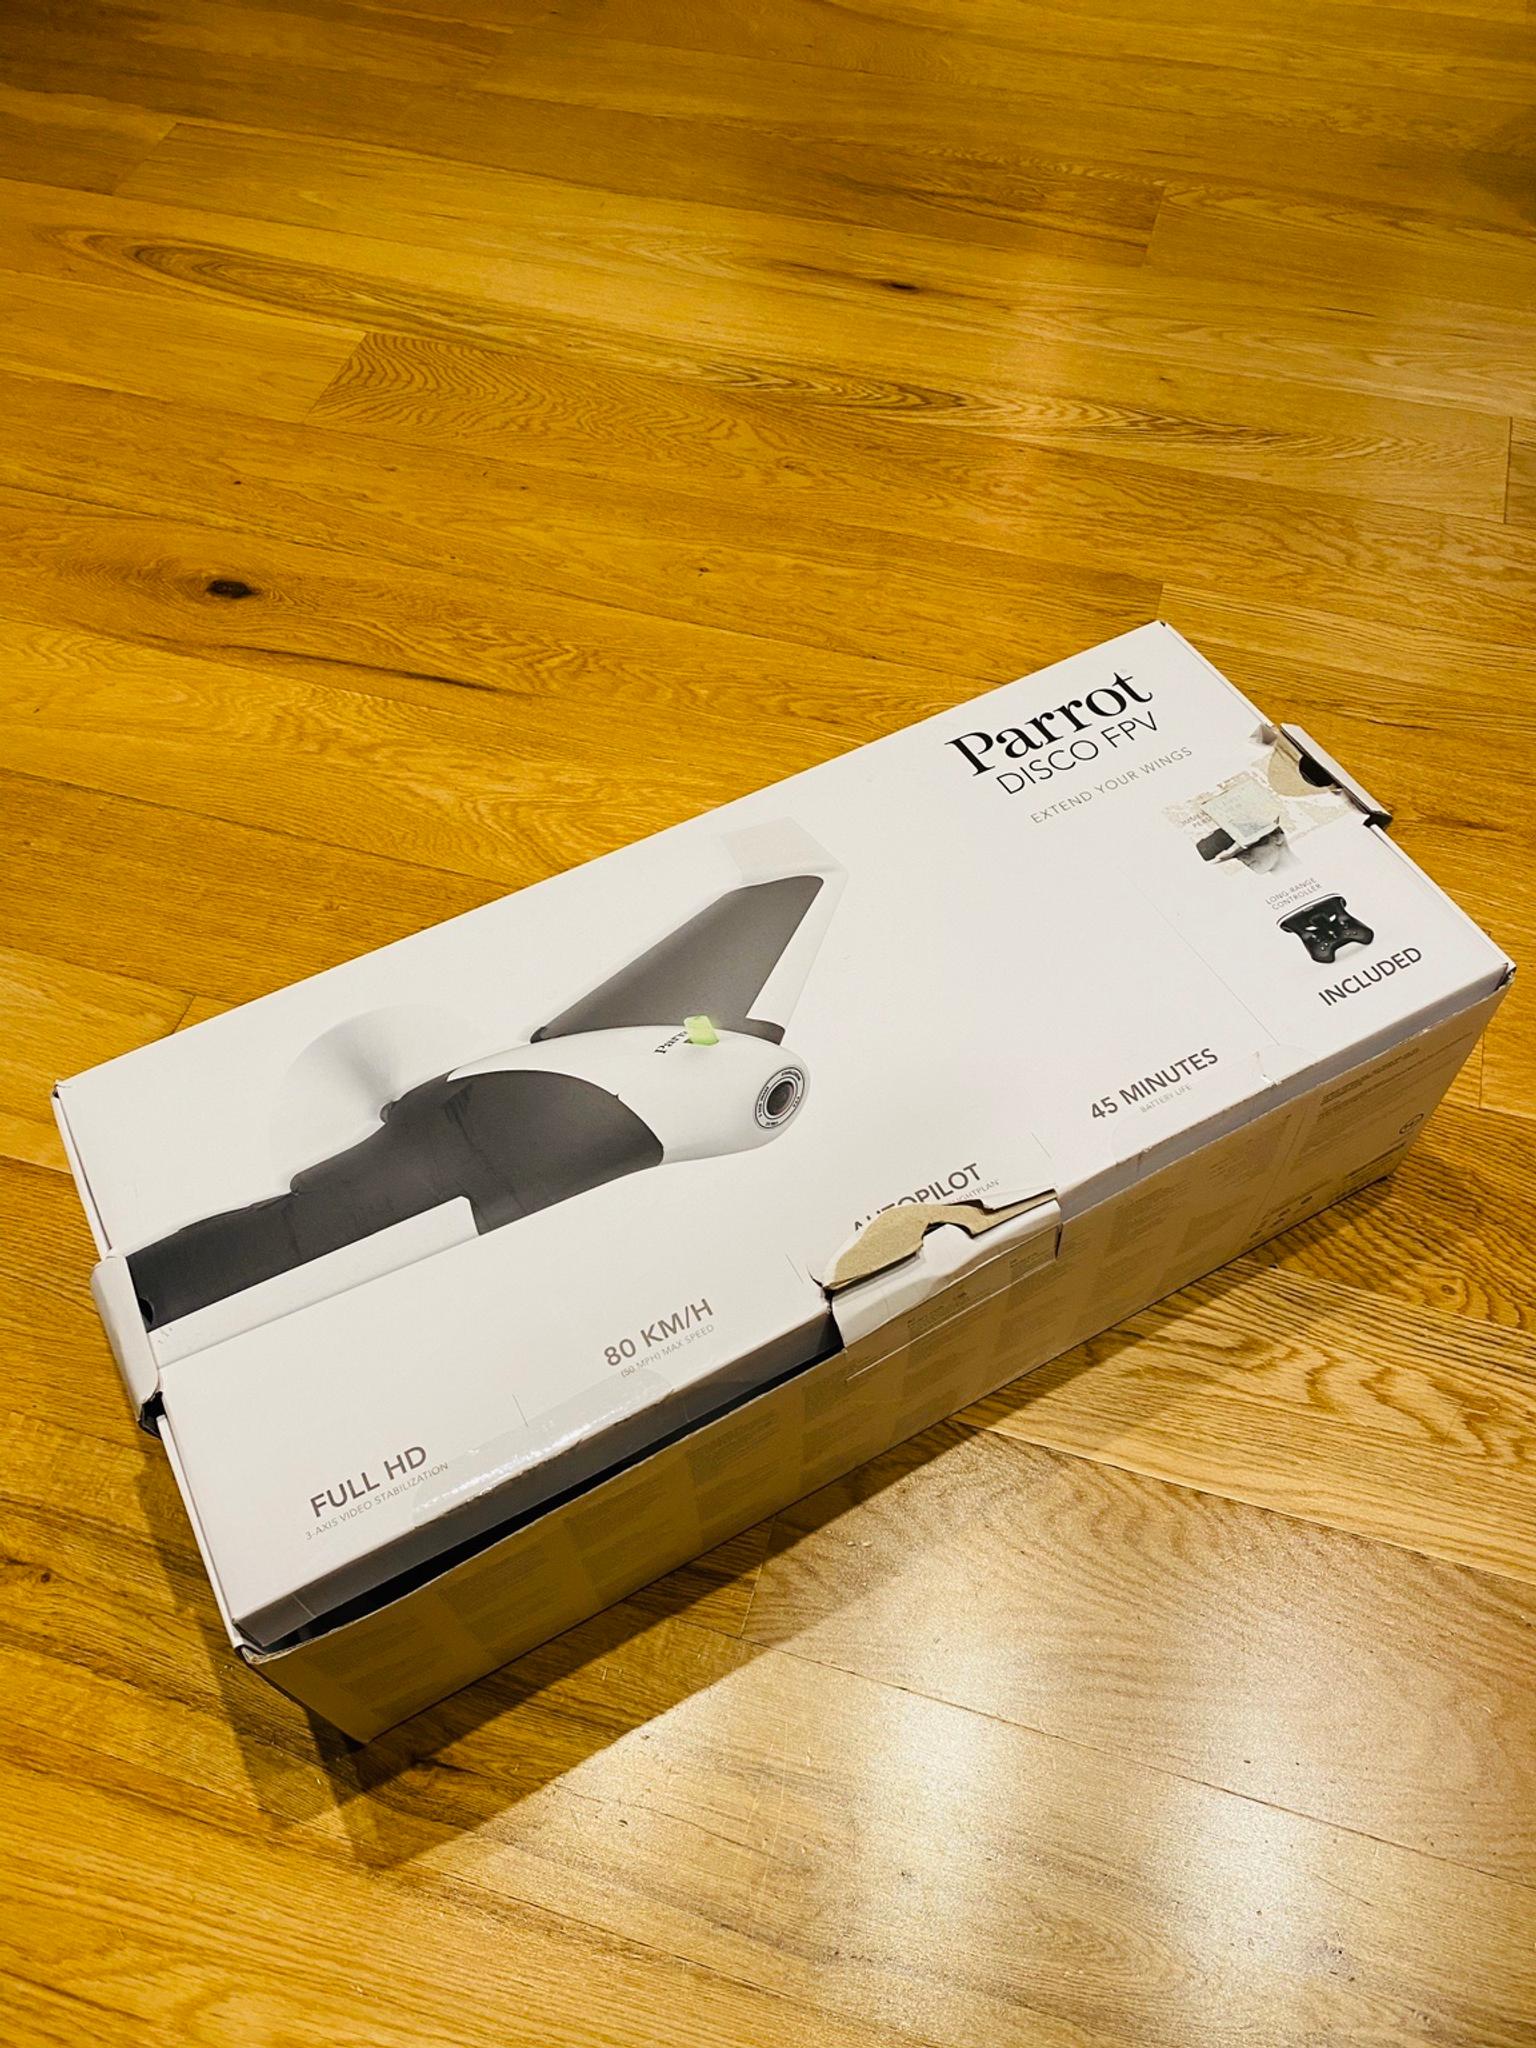 parrot disco used